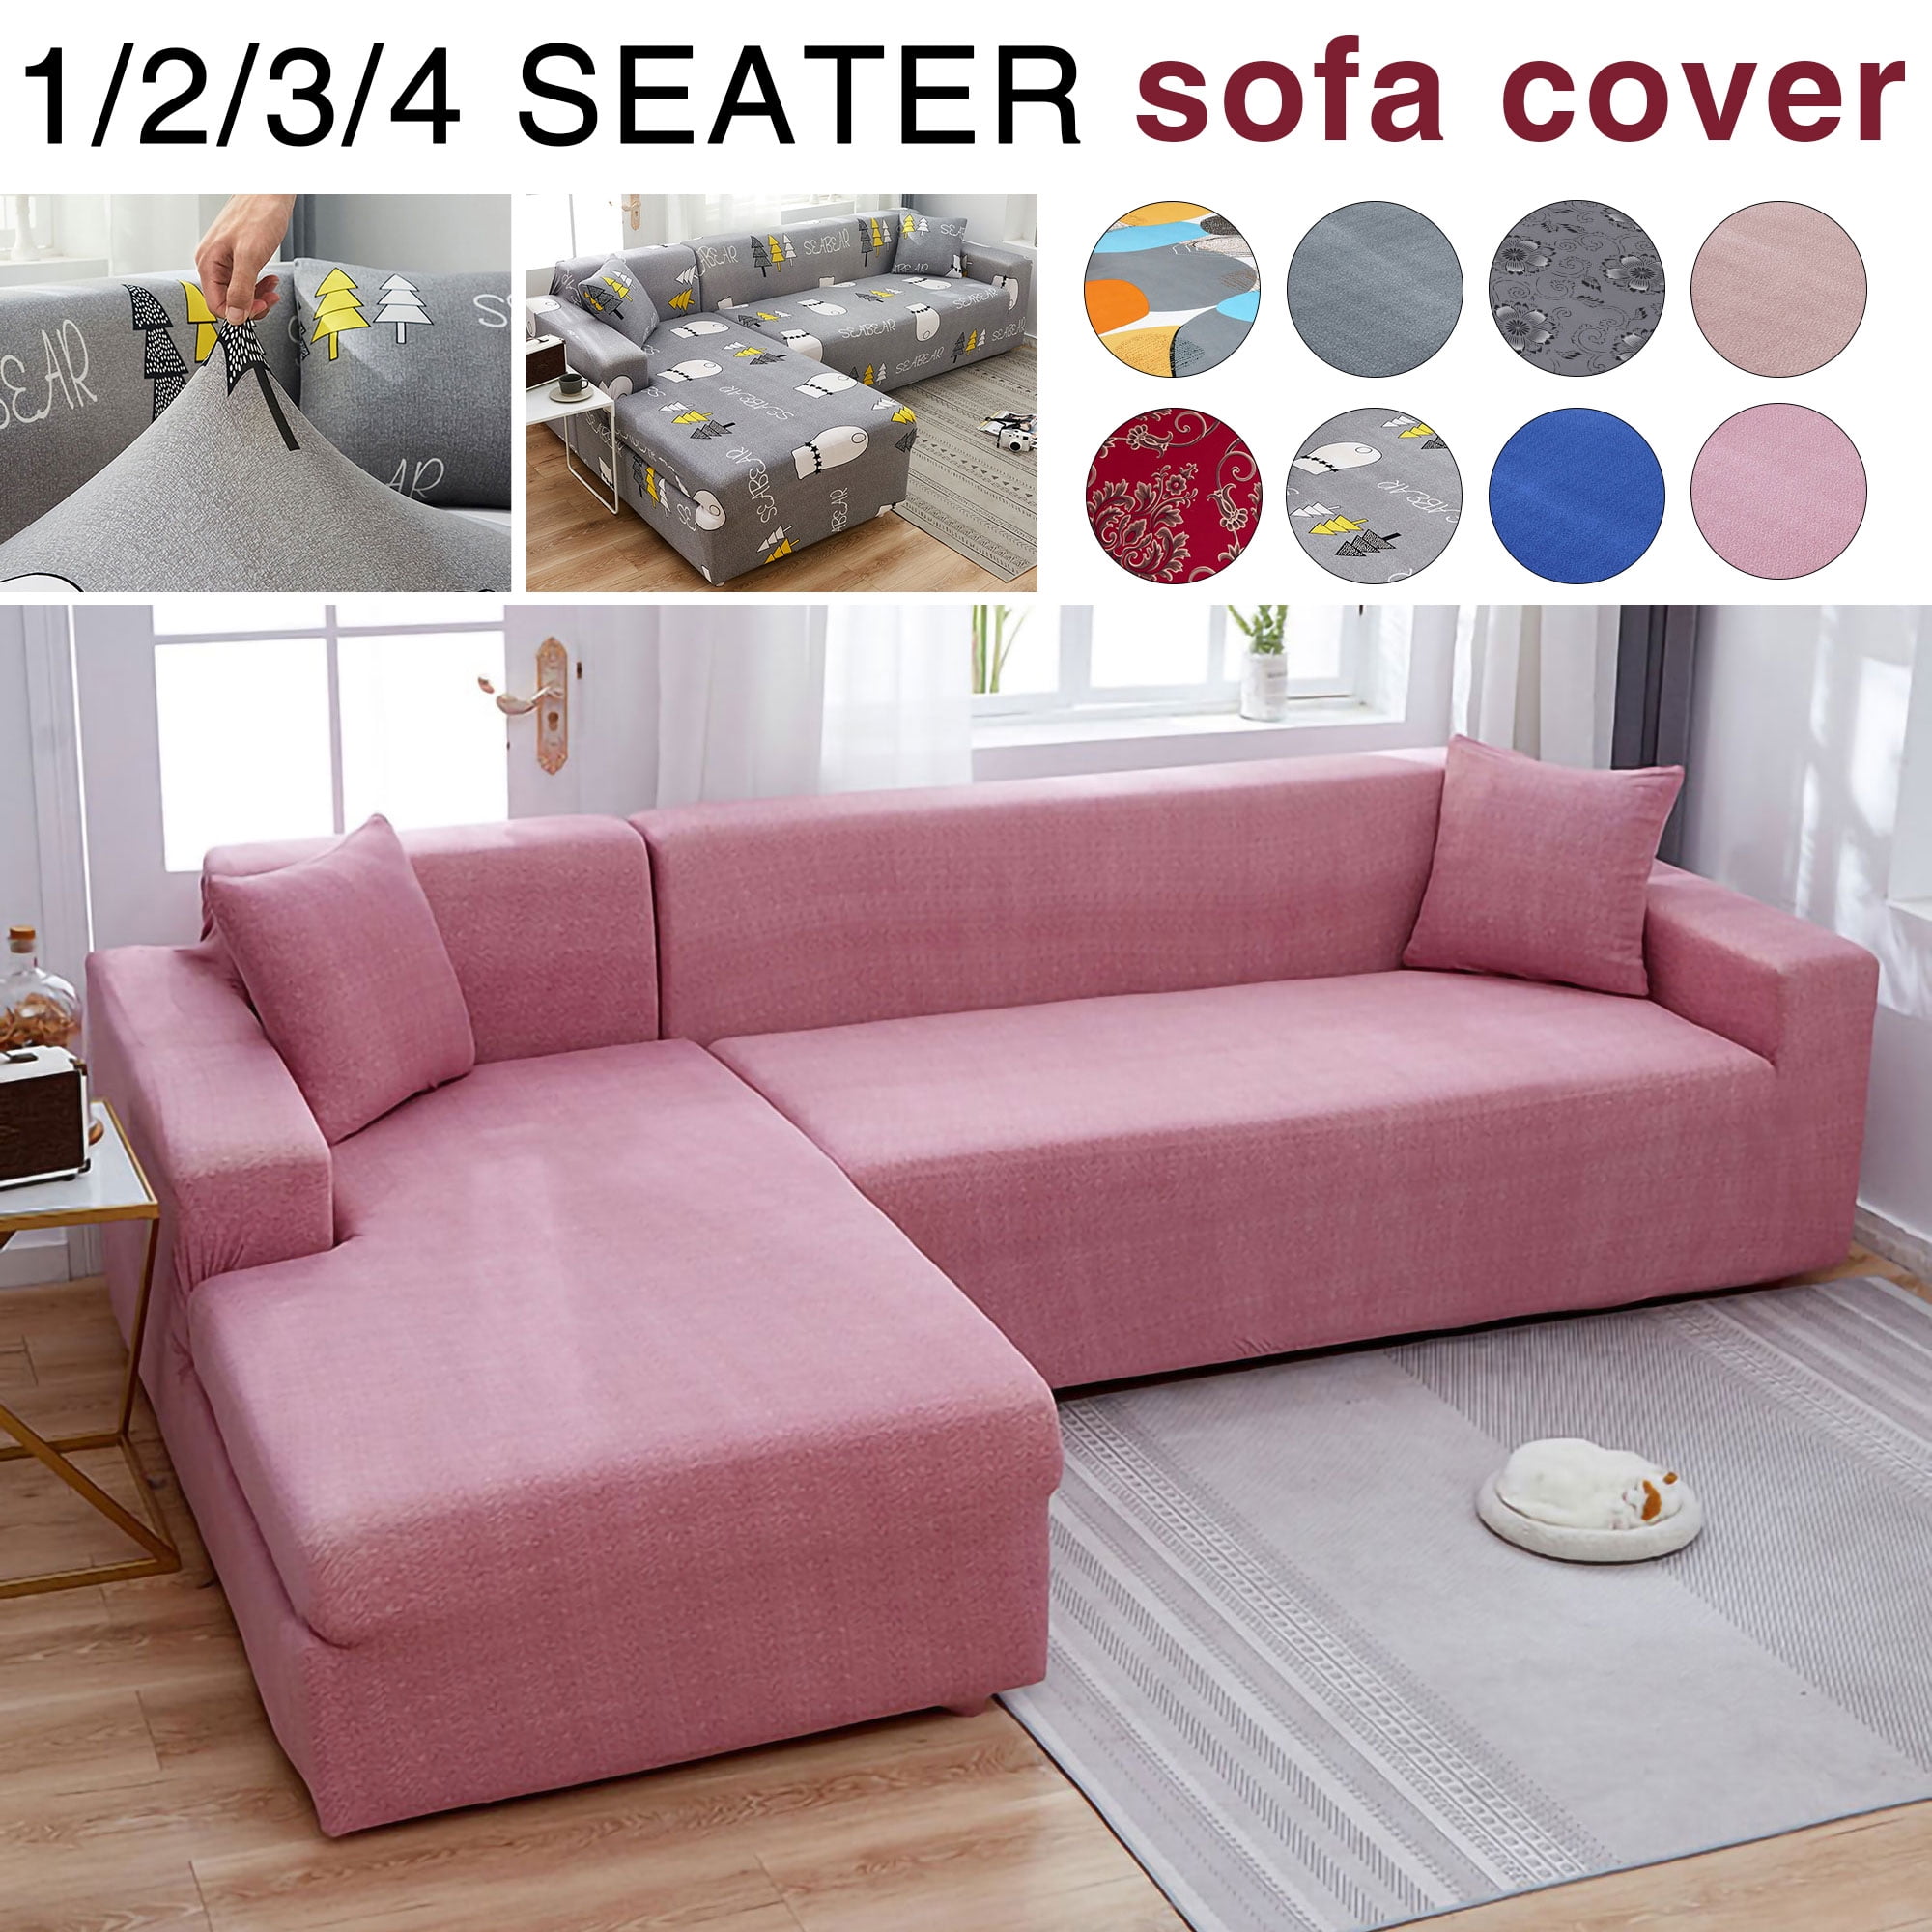 Free 1 Sofa Cover Multiple Furniture/Small Car Storage/Flood Bag Cover:Buy 2 